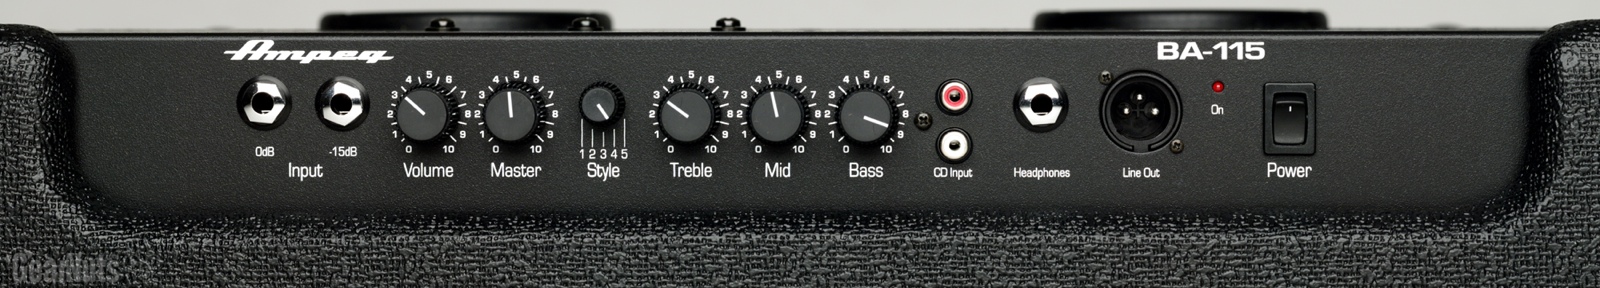 ampeg ba115 top preamp control panel